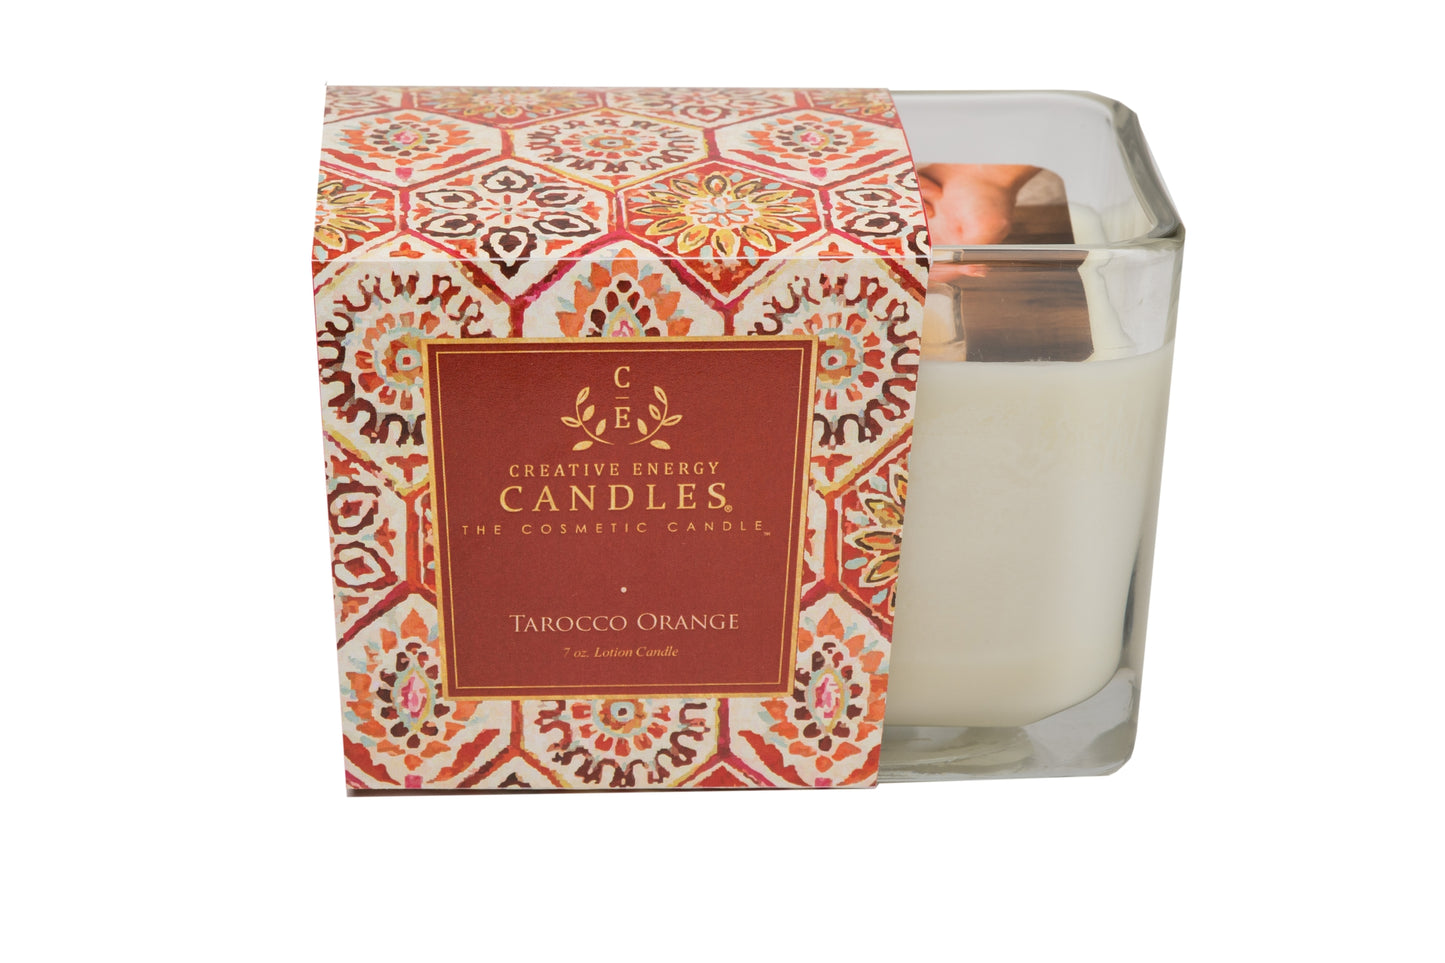 Tarocco Orange: 2-in-1 Soy Lotion Candle